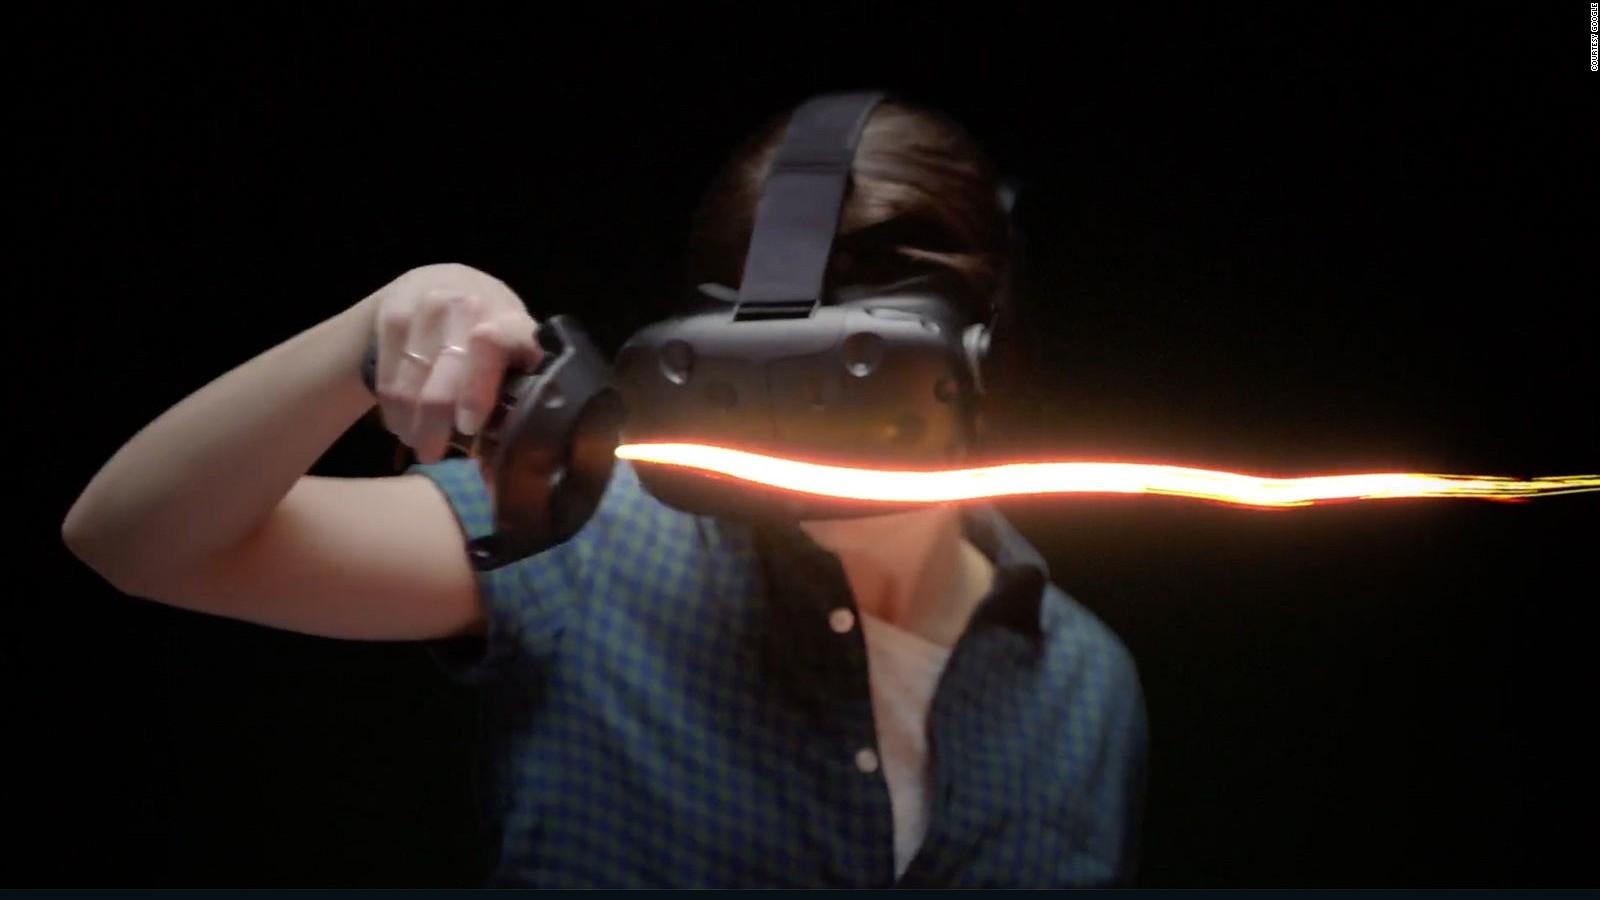 Learning to draw in VR and create AR projections